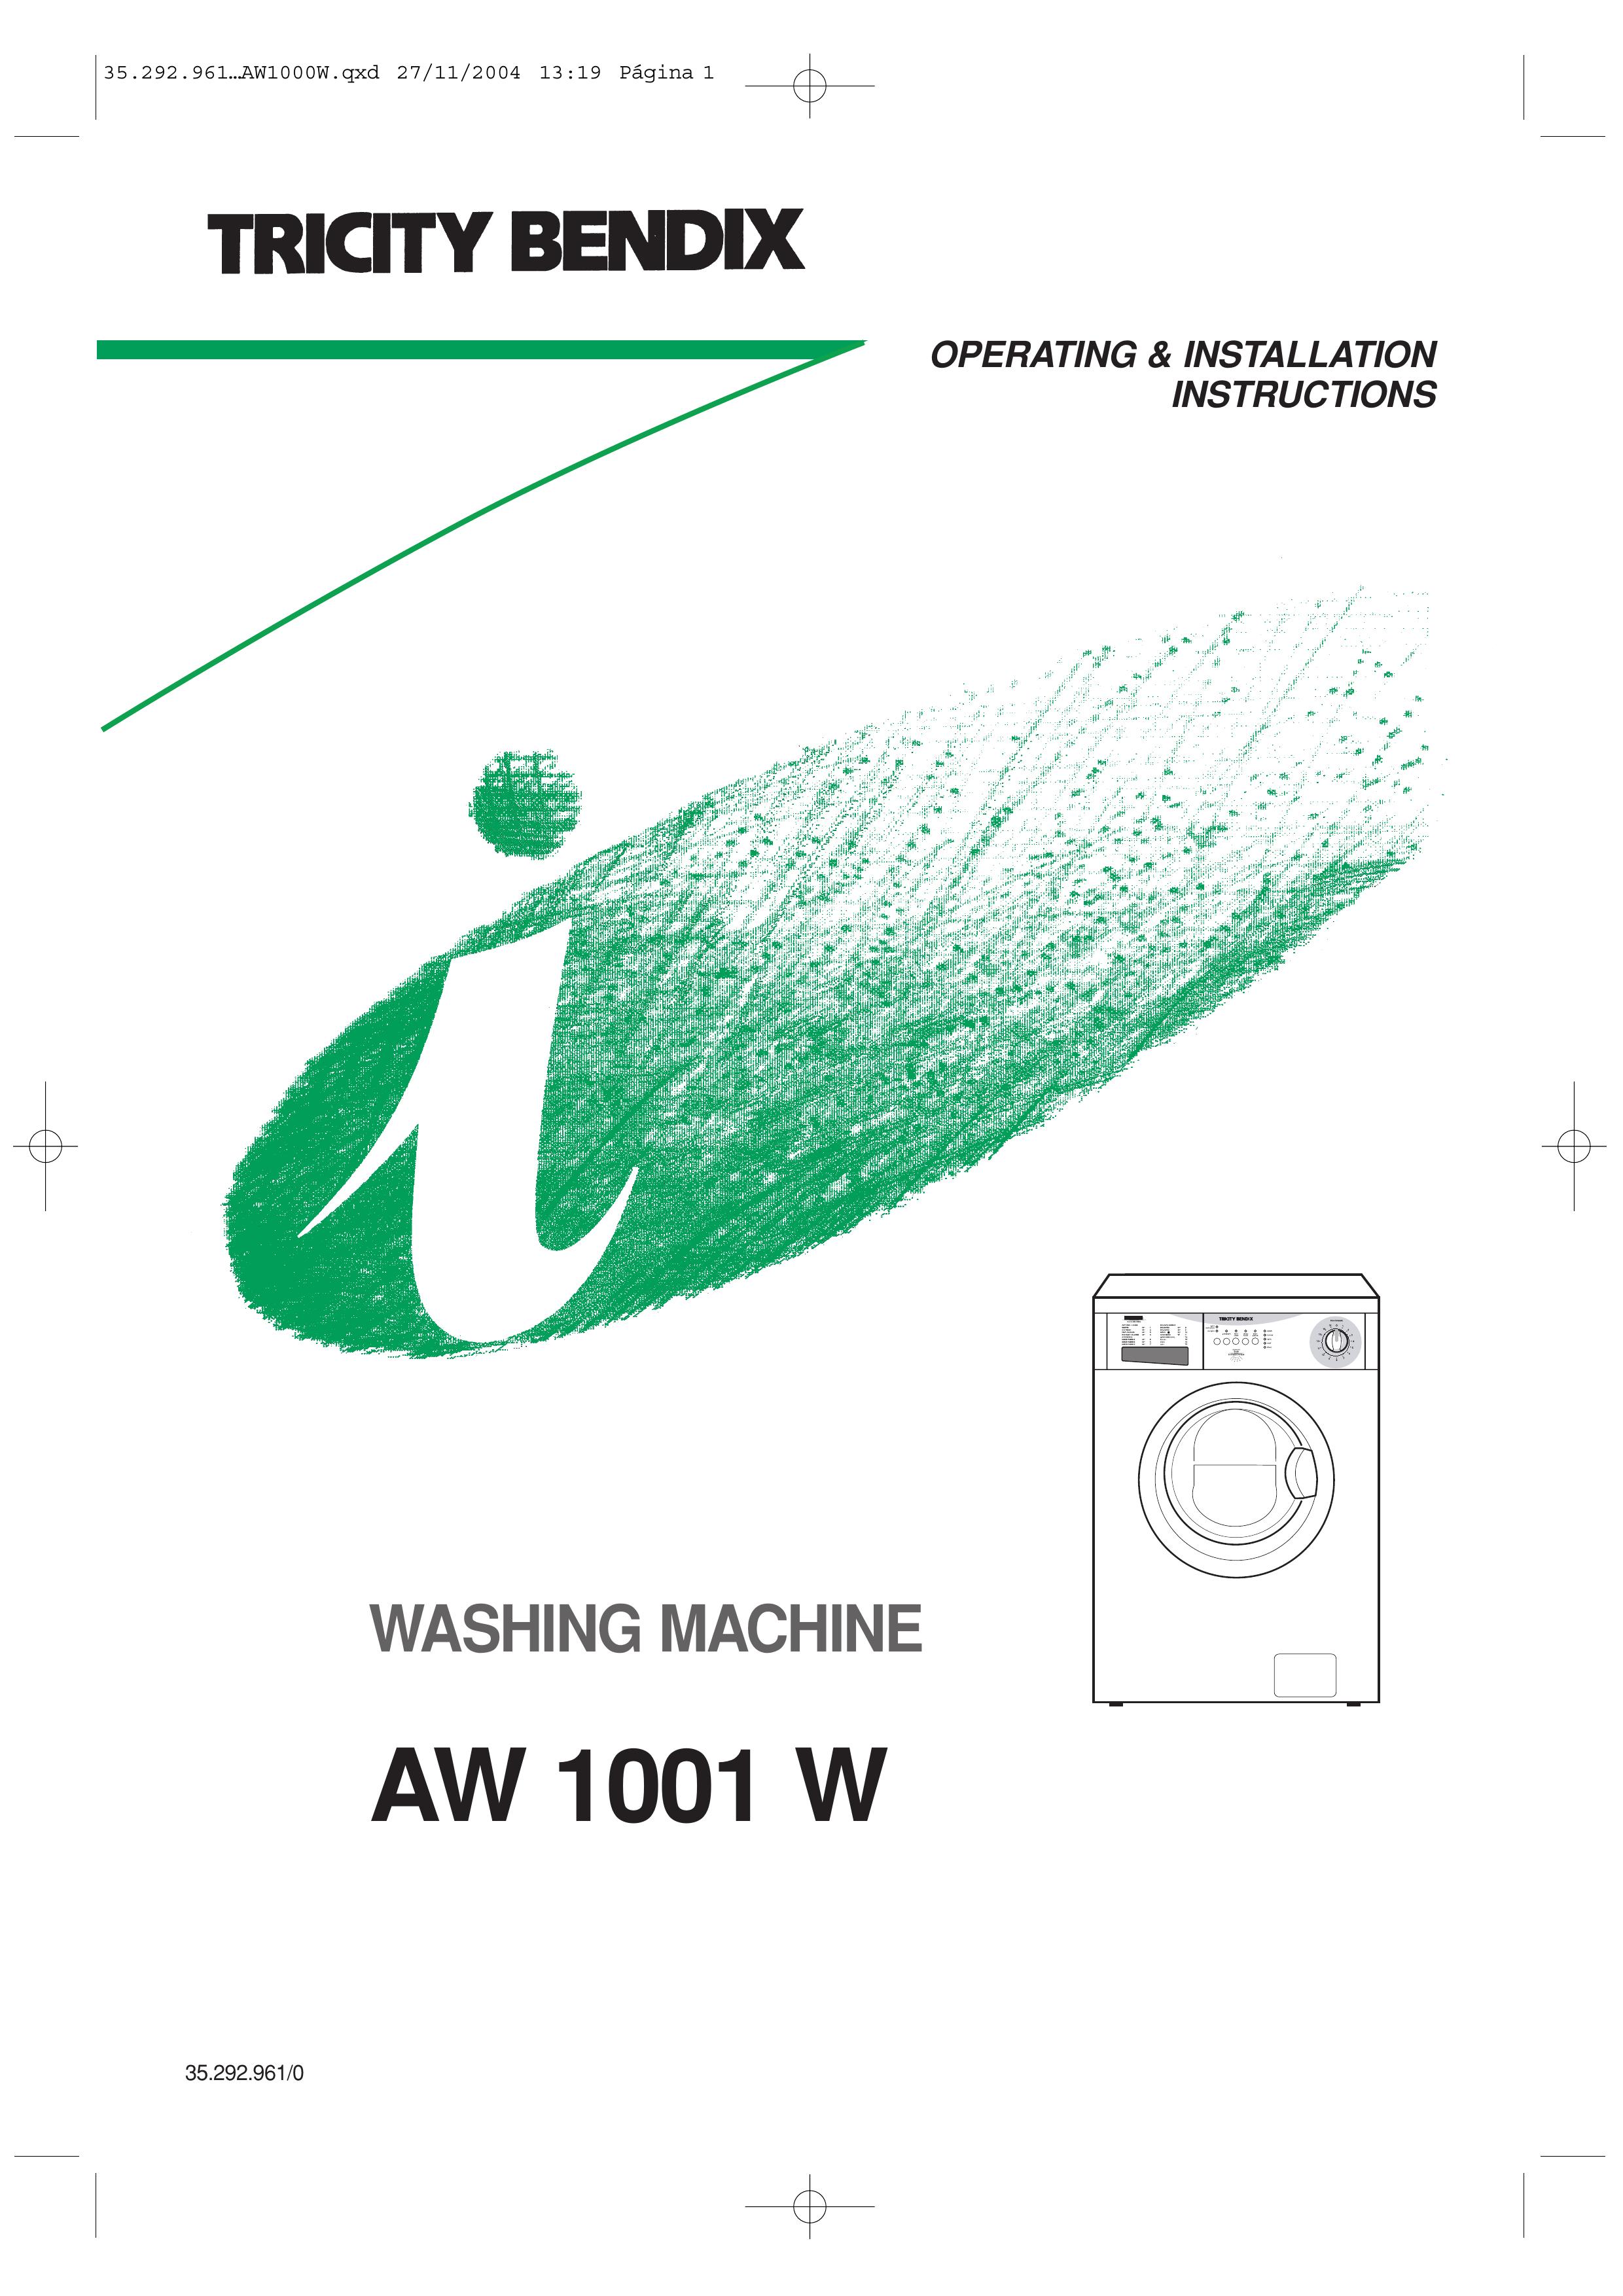 Tricity Bendix AW 1001 W Washer/Dryer User Manual